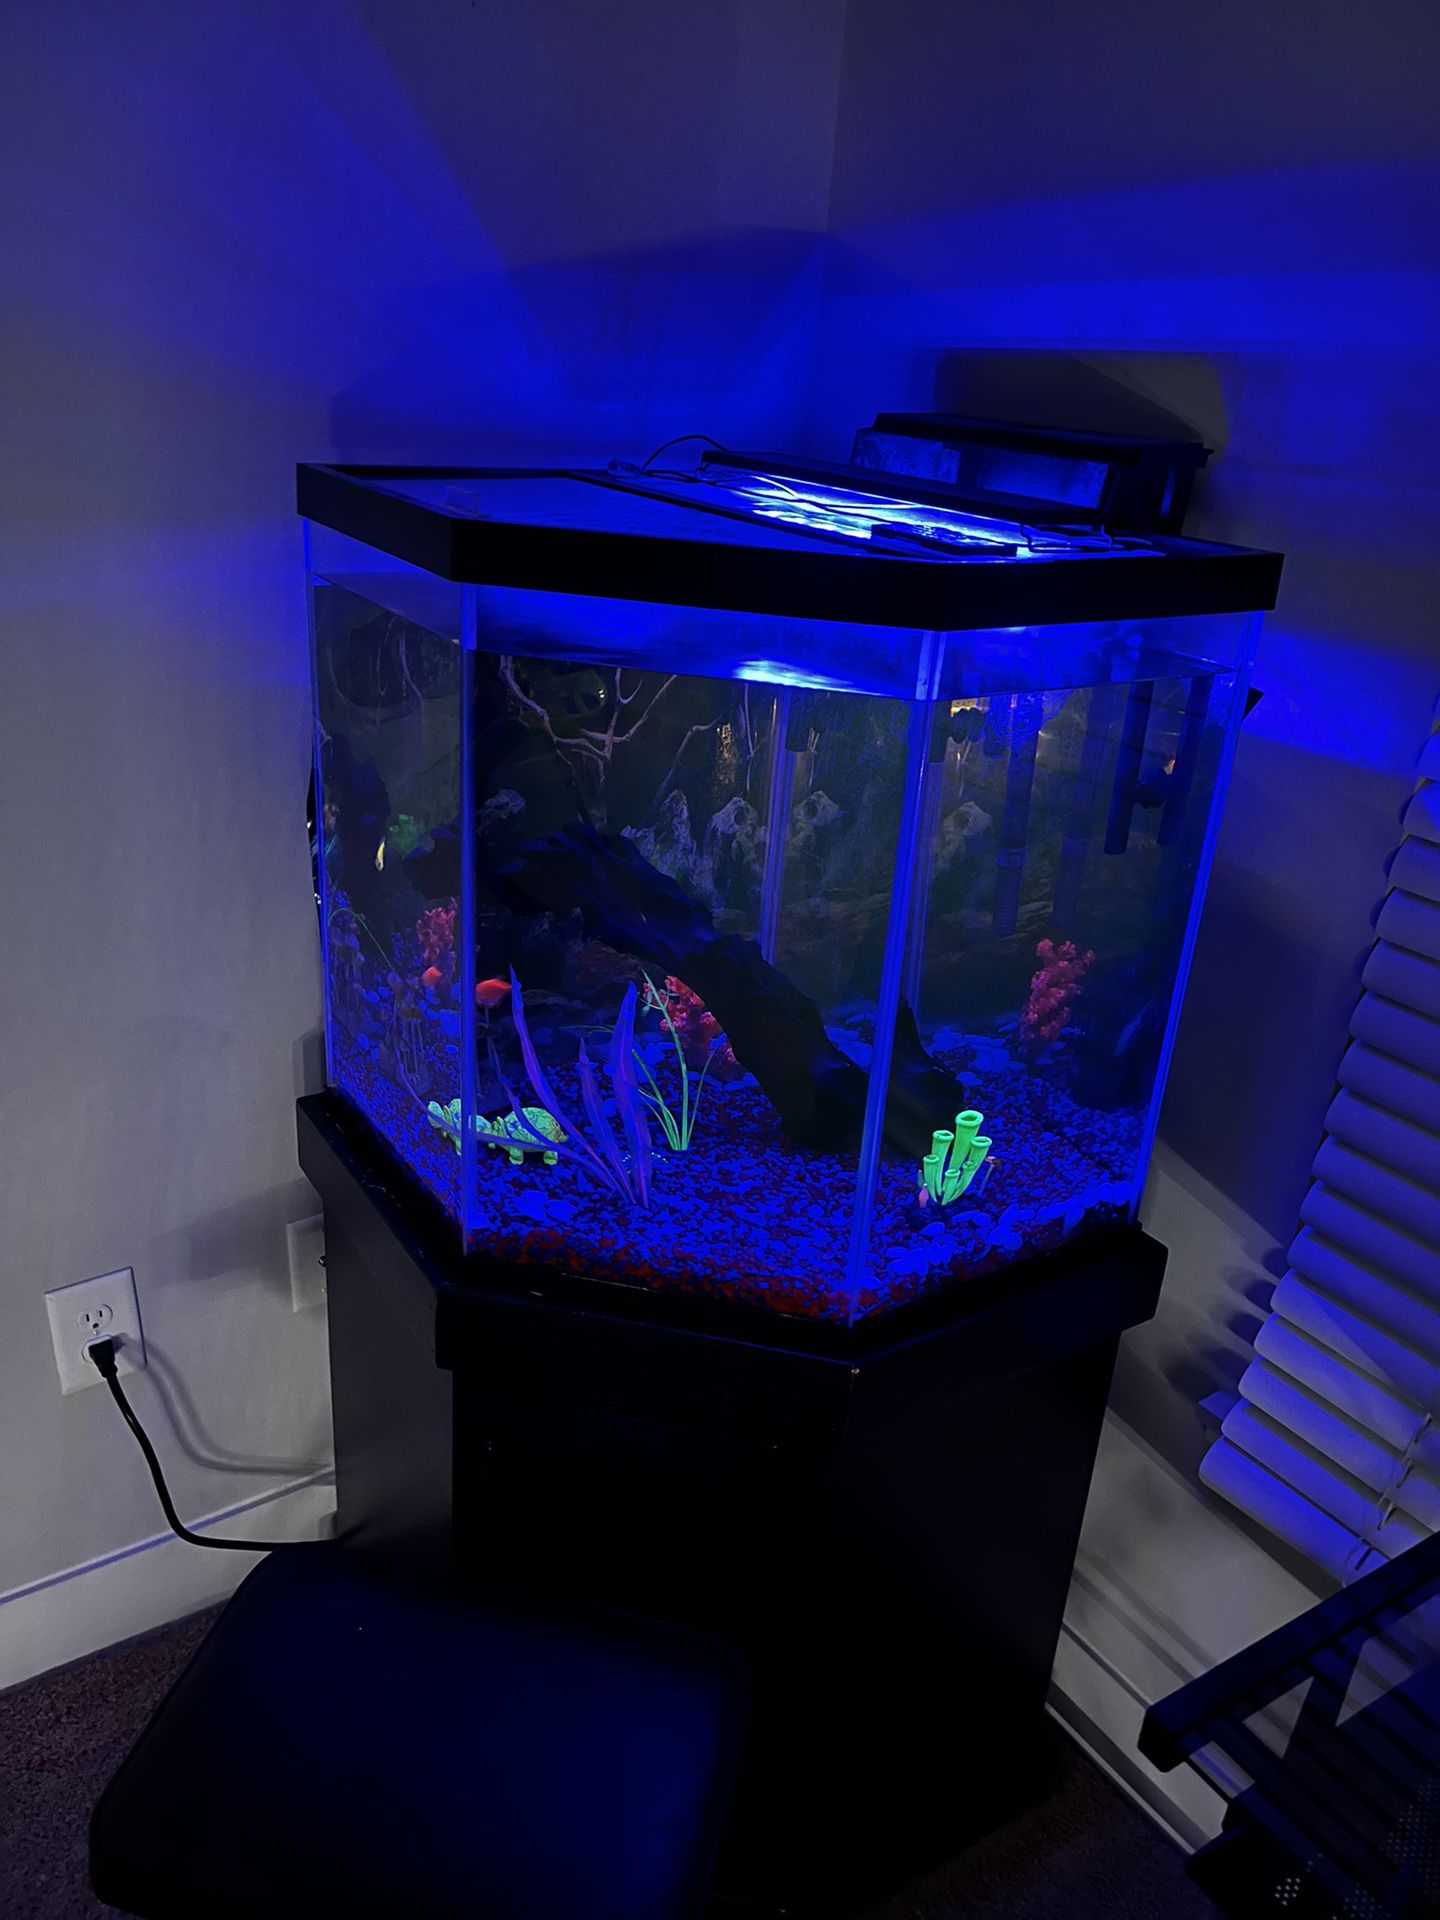 44 Gallon Fish Tank + Stand And Filter